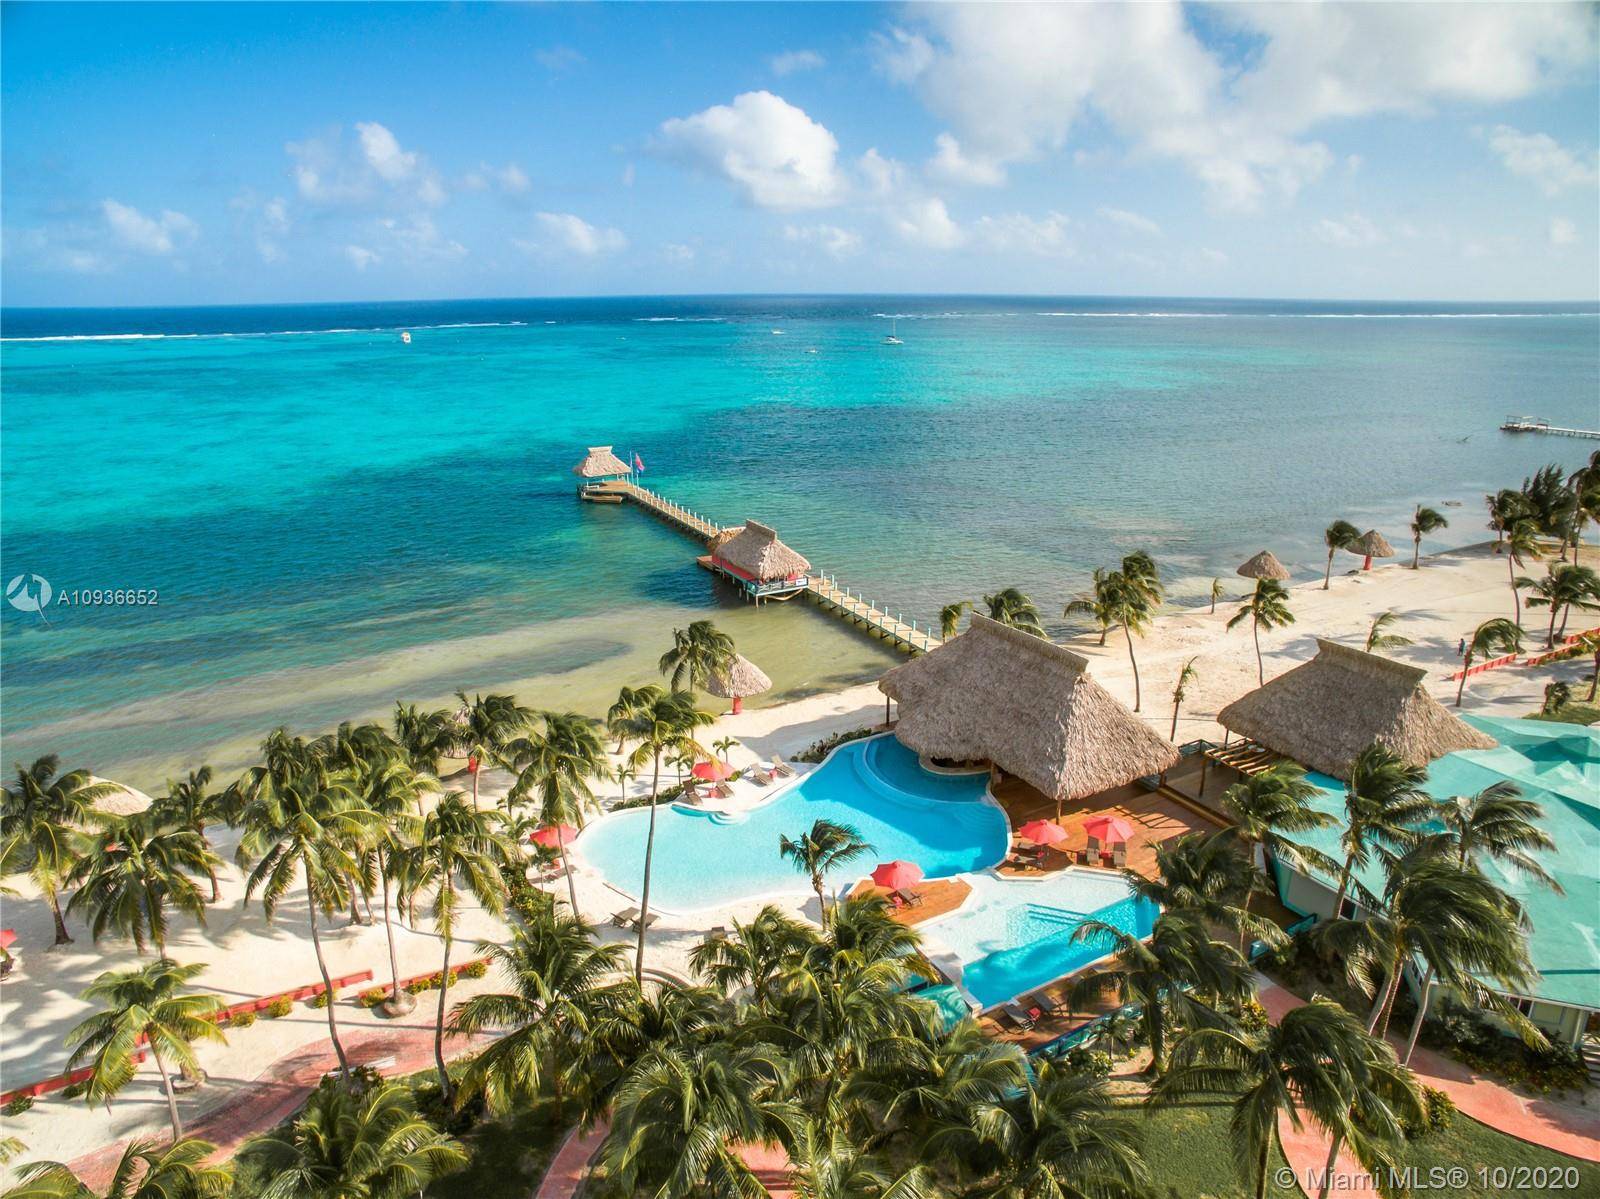 Located on world famous Ambergris Caye in Belize, Costa Blu is a Wyndham Trademark Collection oceanfront resort, awarded the top 1 Travelers' Choice Best of the Best Hotel for 2020 ...